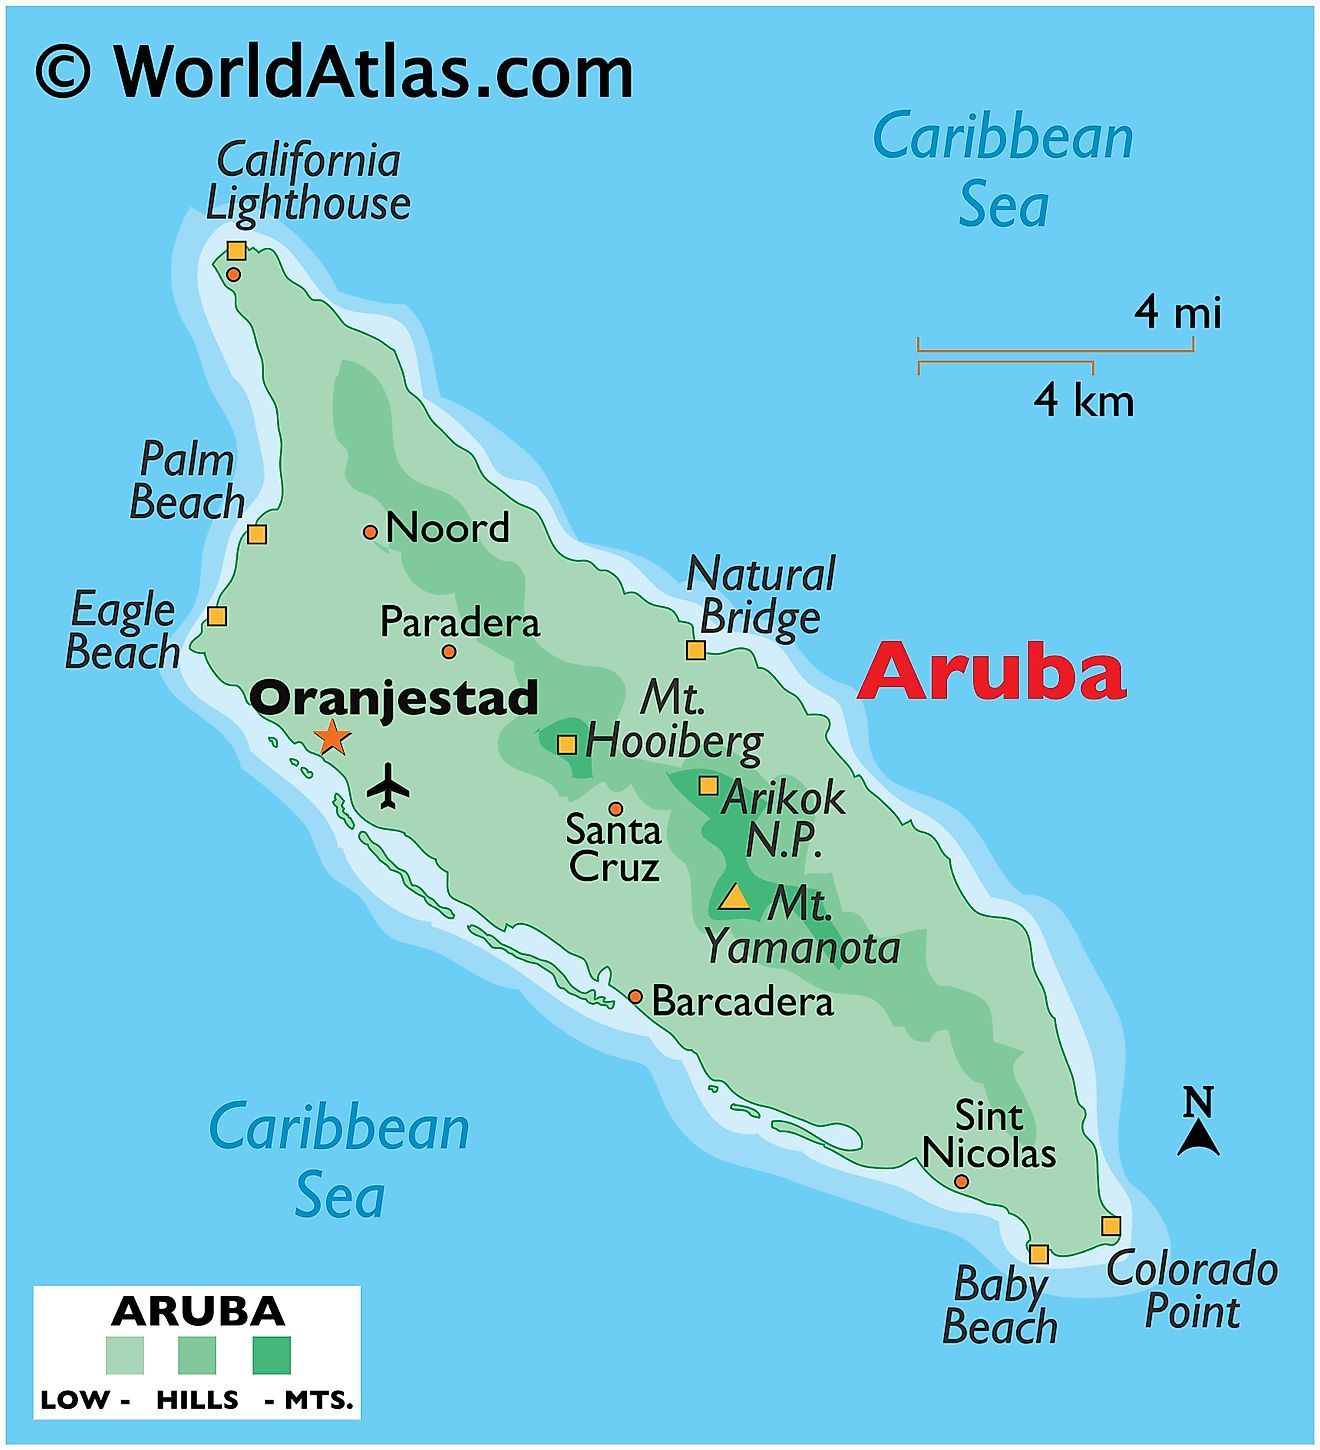 Physical Map of Aruba showing terrain, national parks, beaches, highest point, etc.